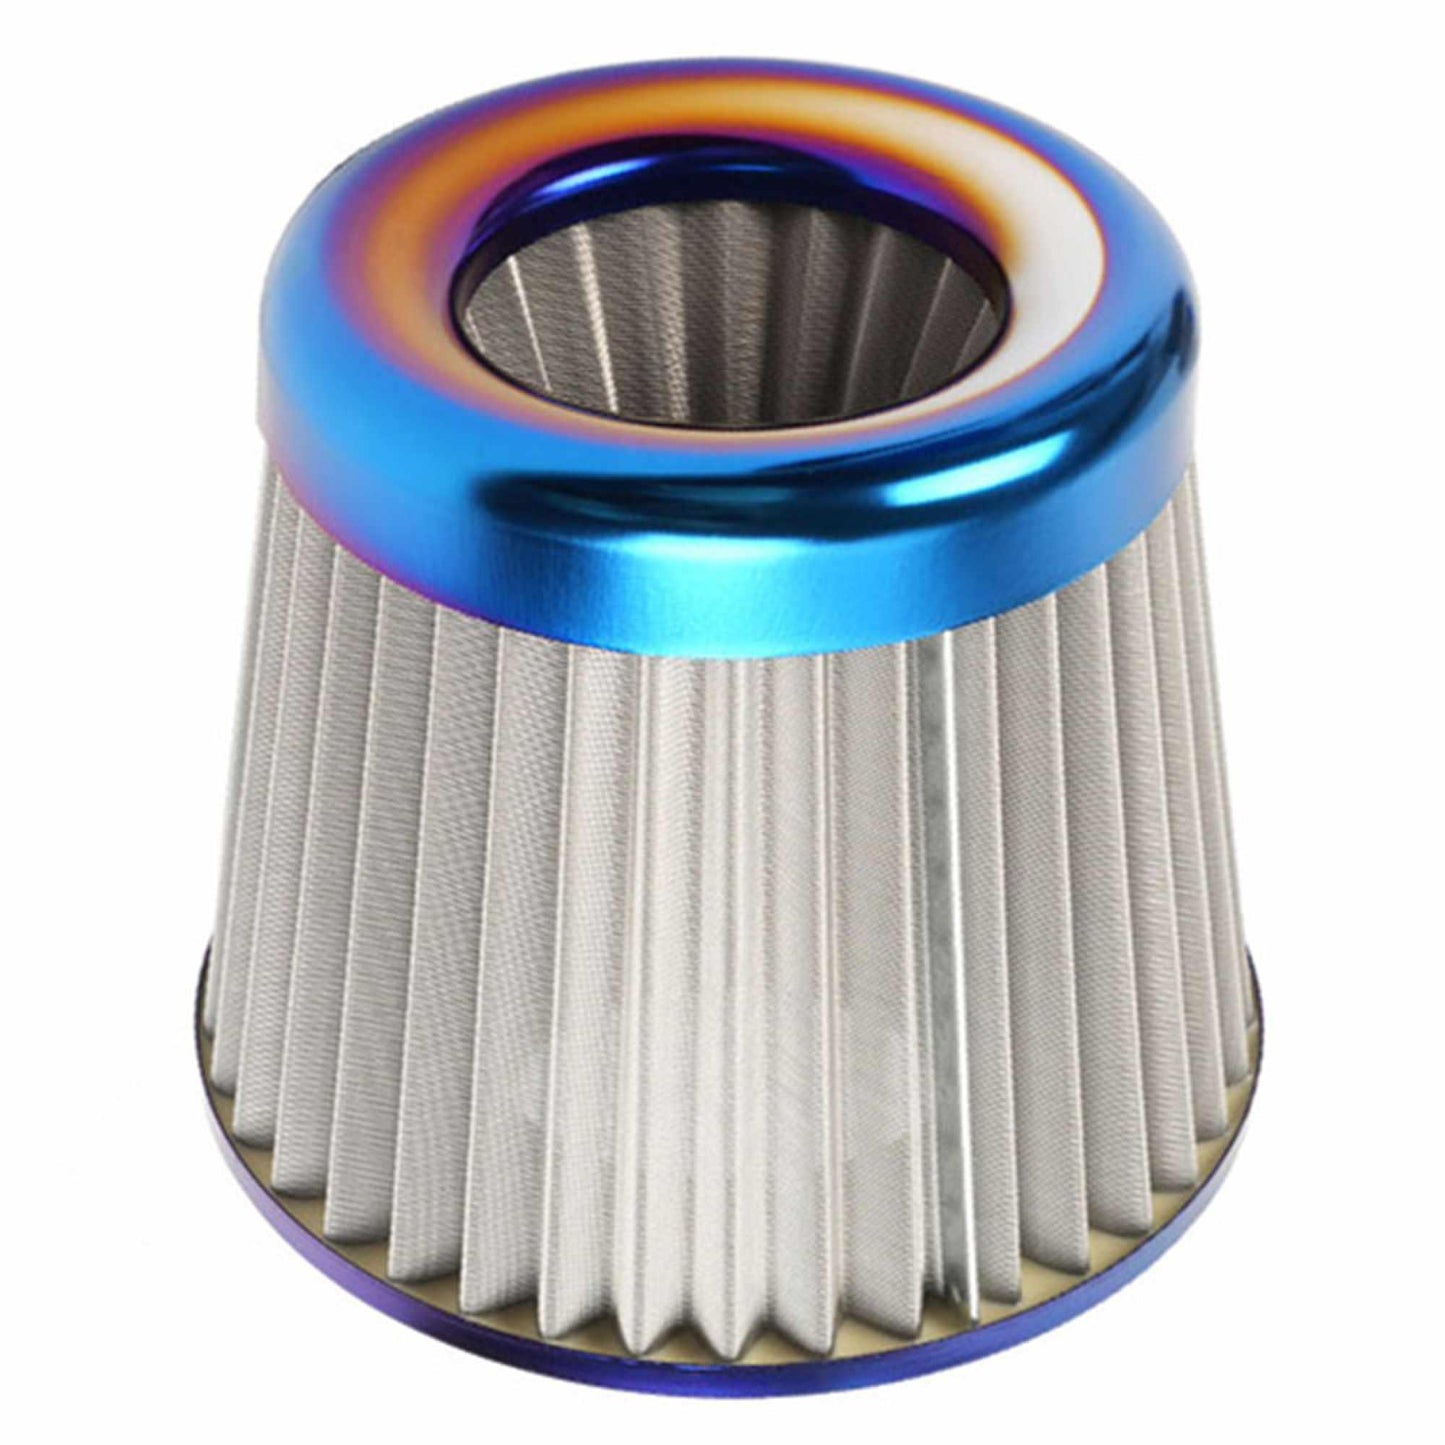 RASTP Universal 76mm Stainless Steel High Power Flow Cold Air Filter Car Round Cone Air Intake Filter Induction Kit - RASTP